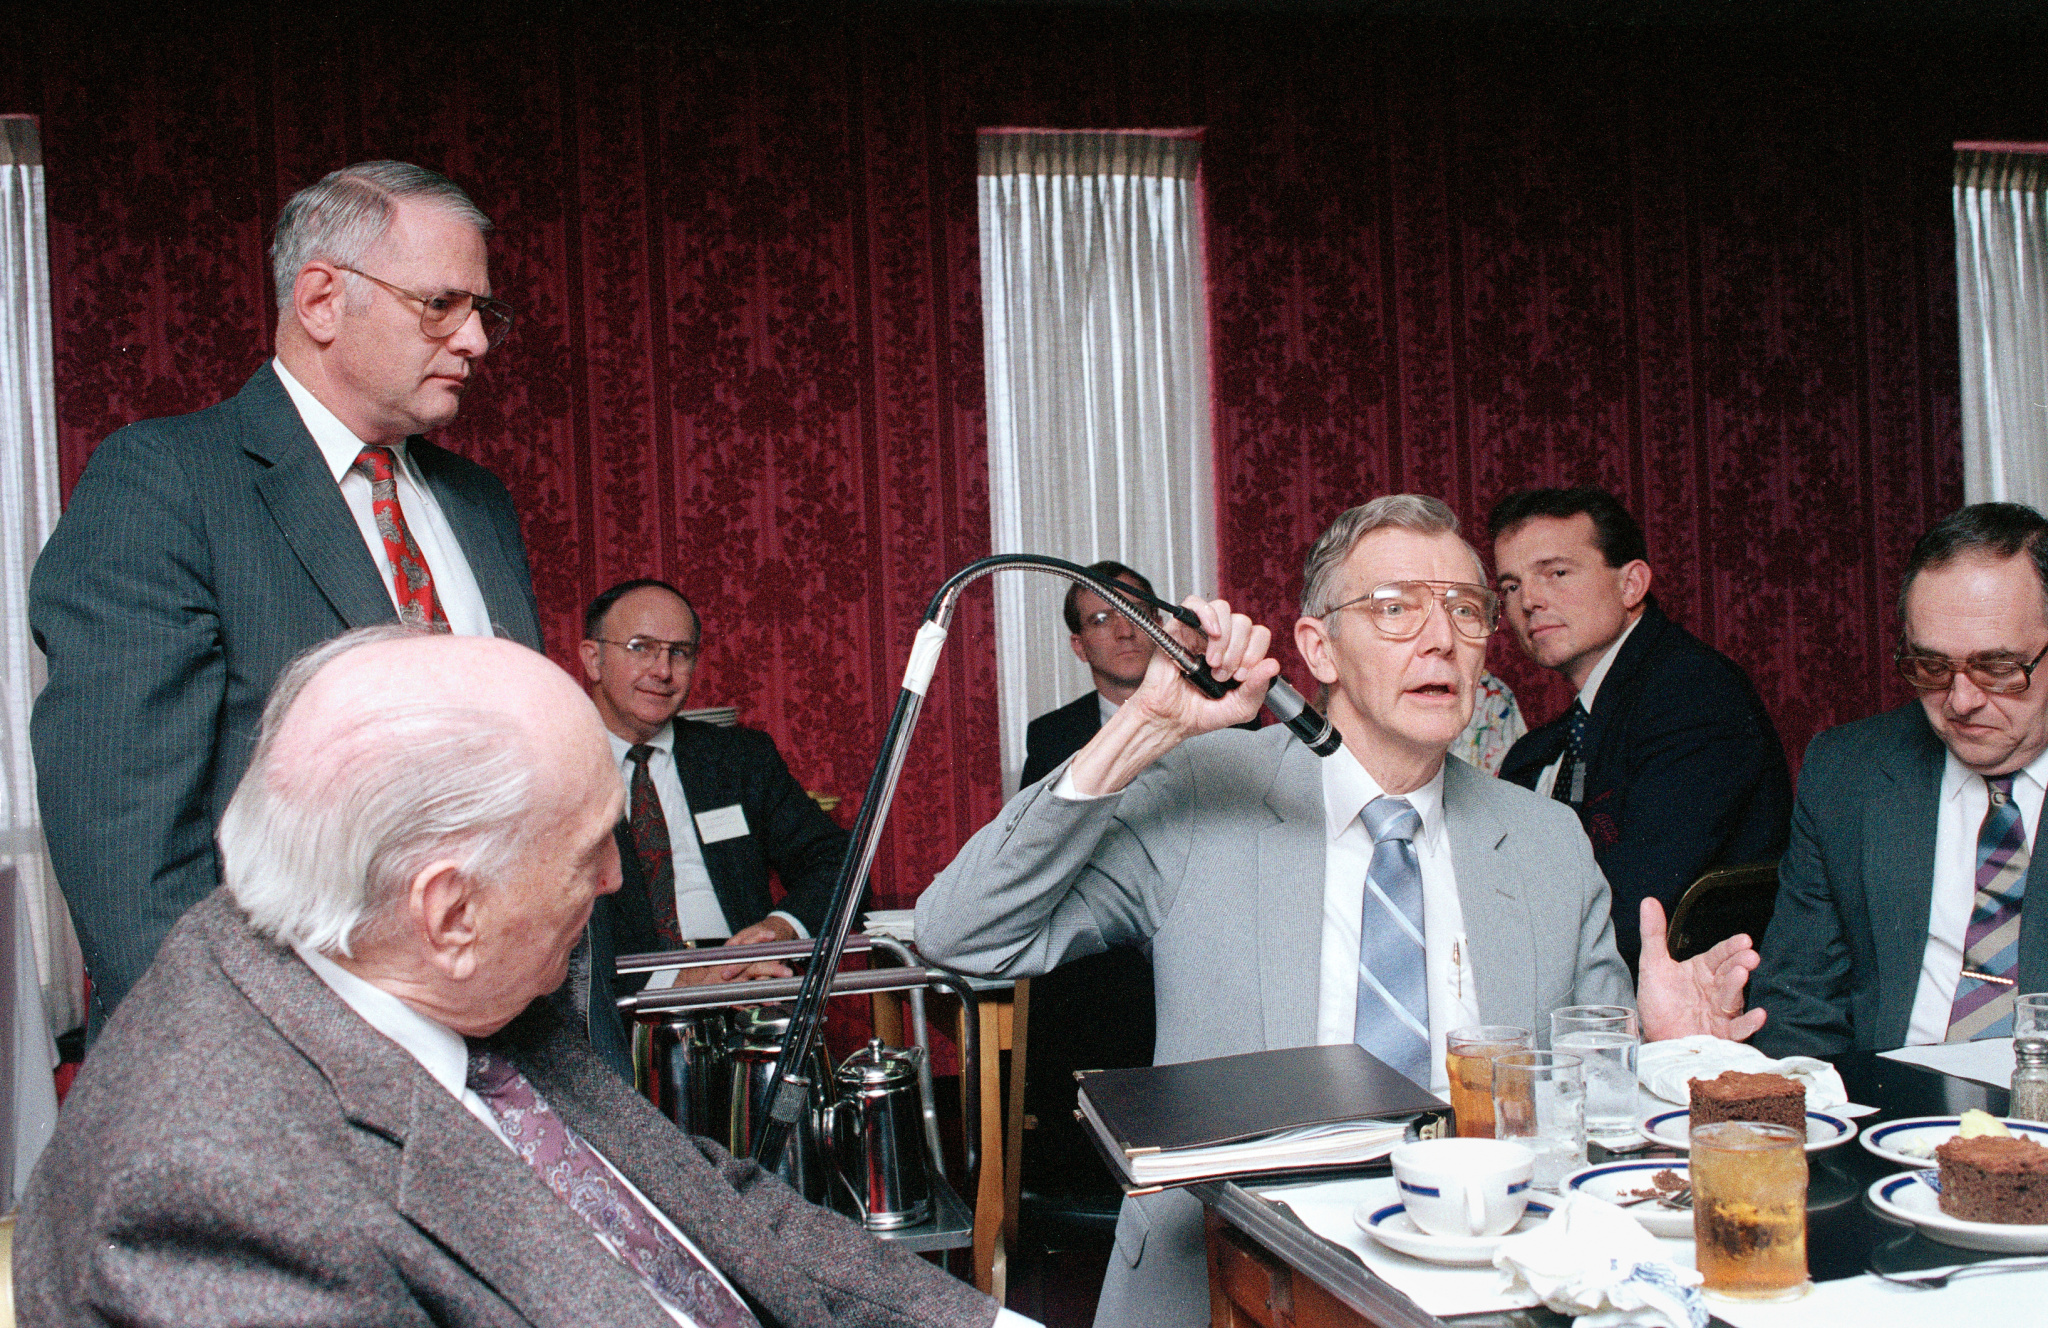 Fremont speaking to a group after the onset of ALS in 1989